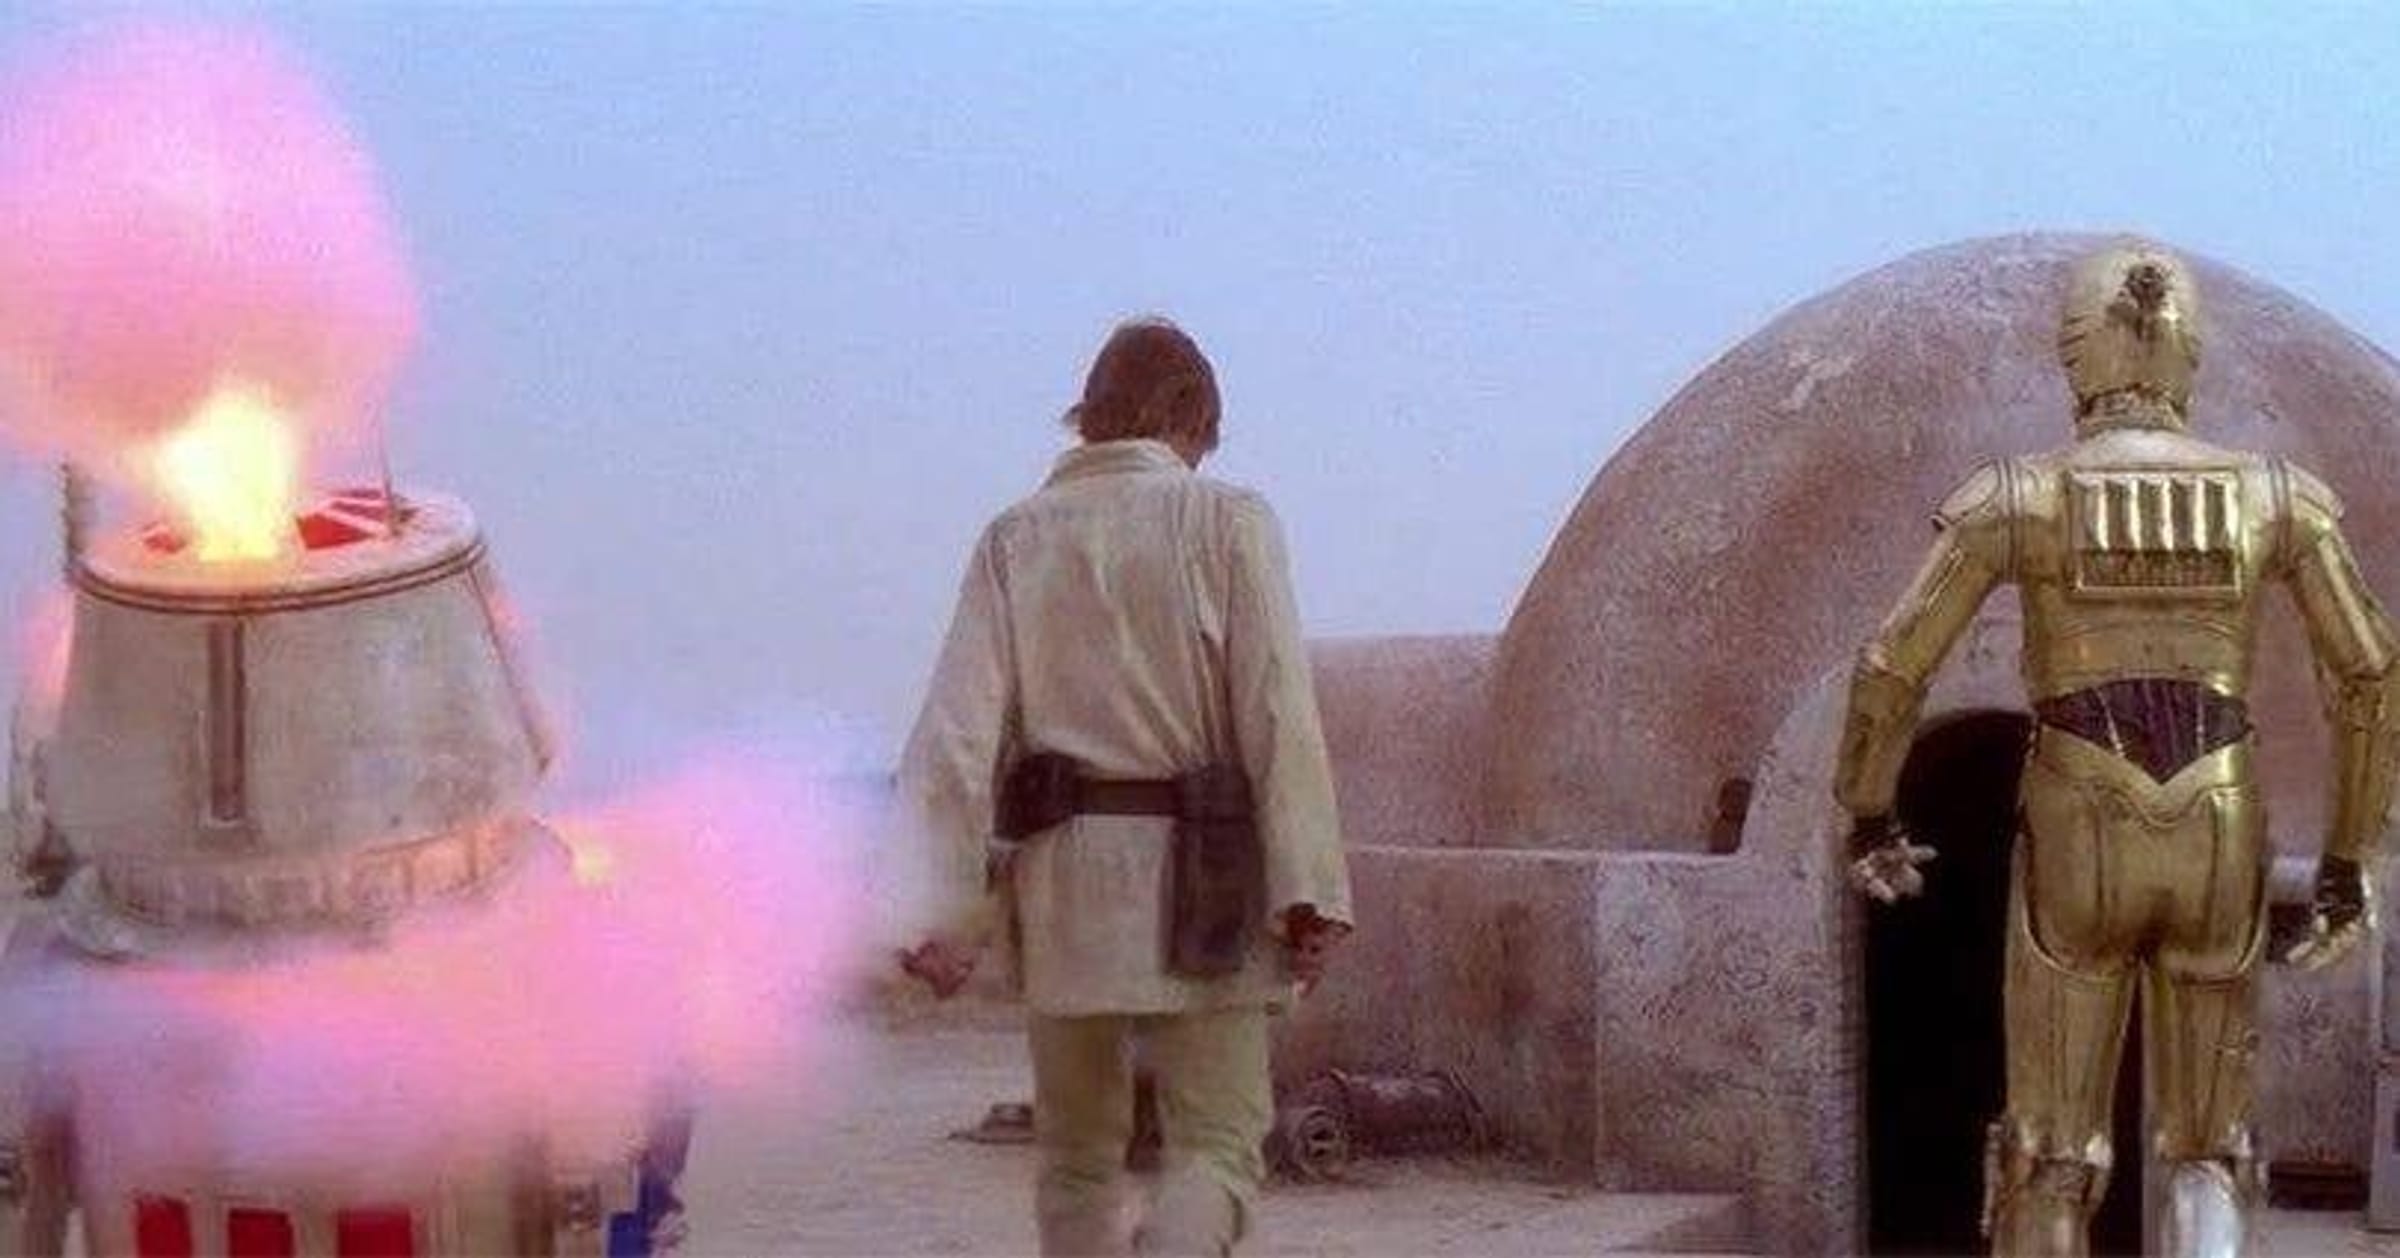 A Trip to Mos Eisley: Top 5 STAR WARS Characters I'd Have a Drink